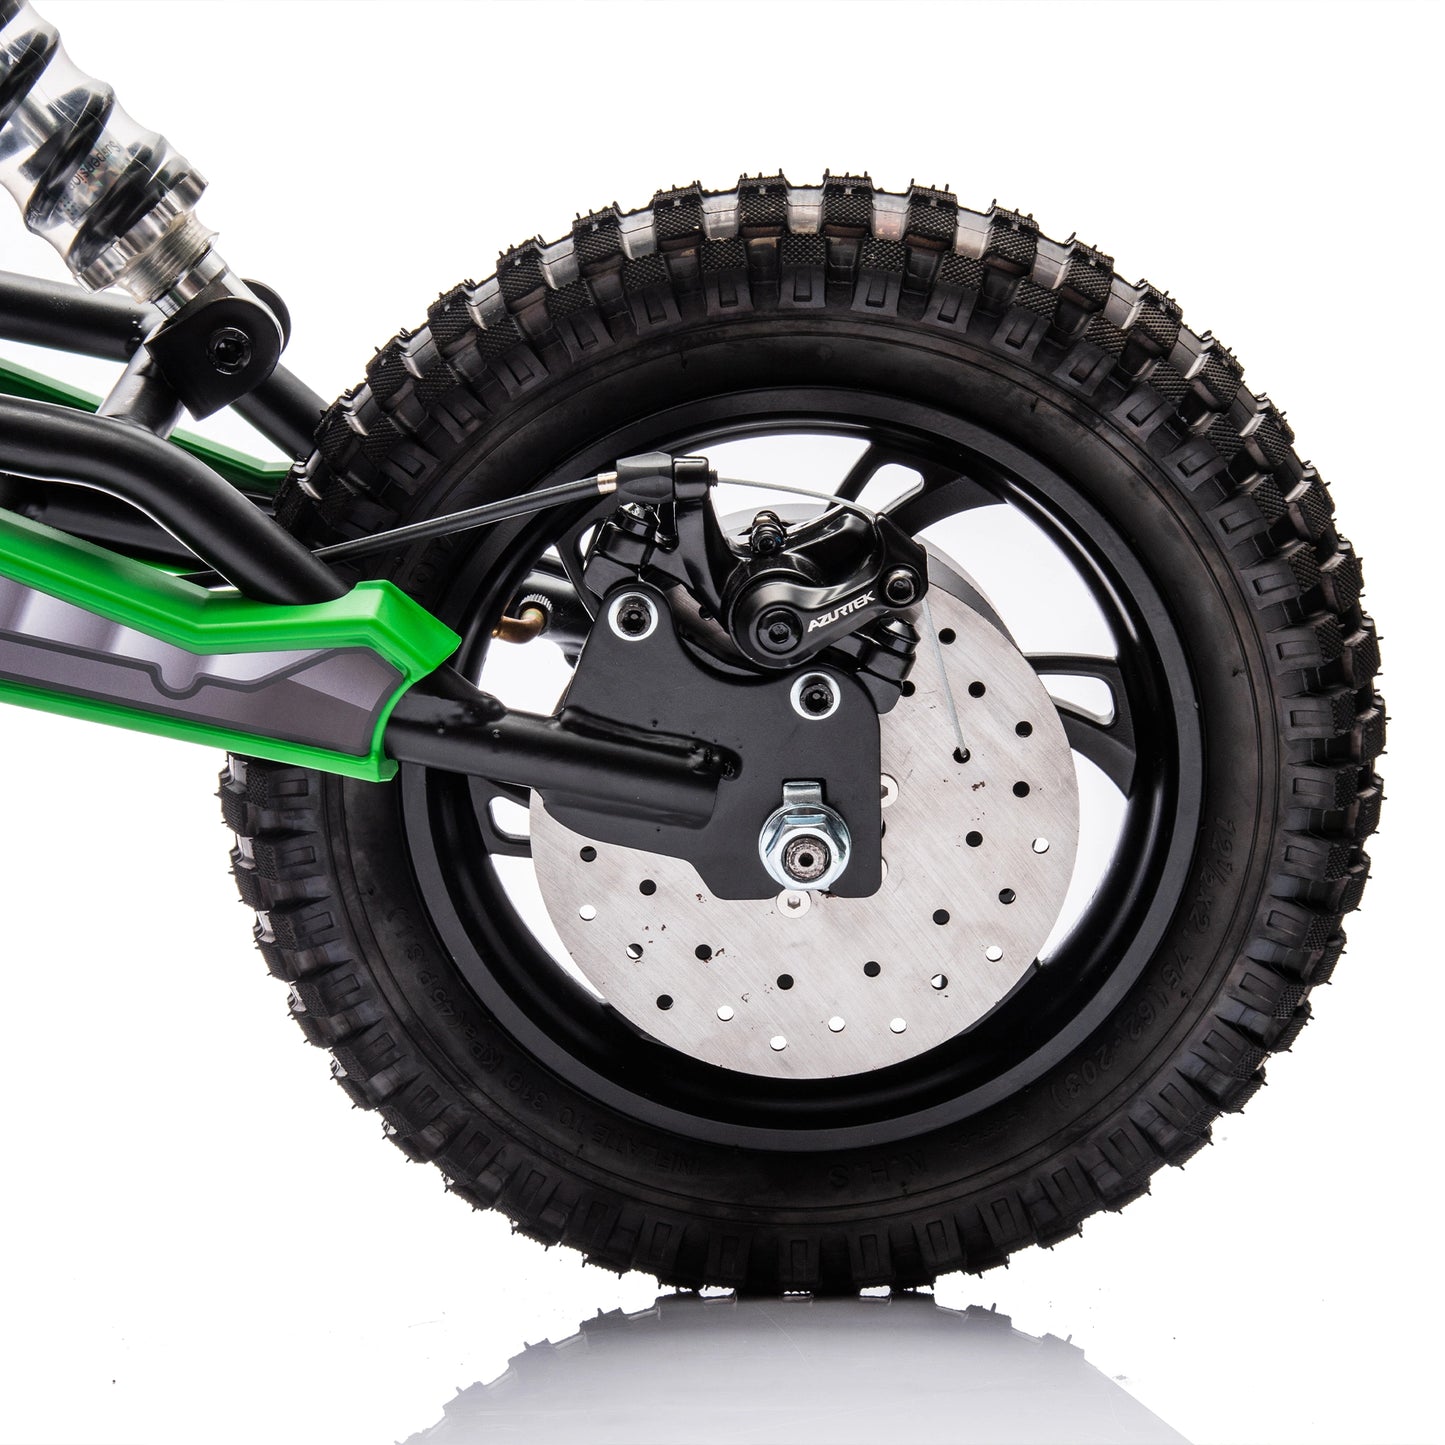 Electric mini dirt motorcycle for kids 350w xxxl motorcycle 36V Green